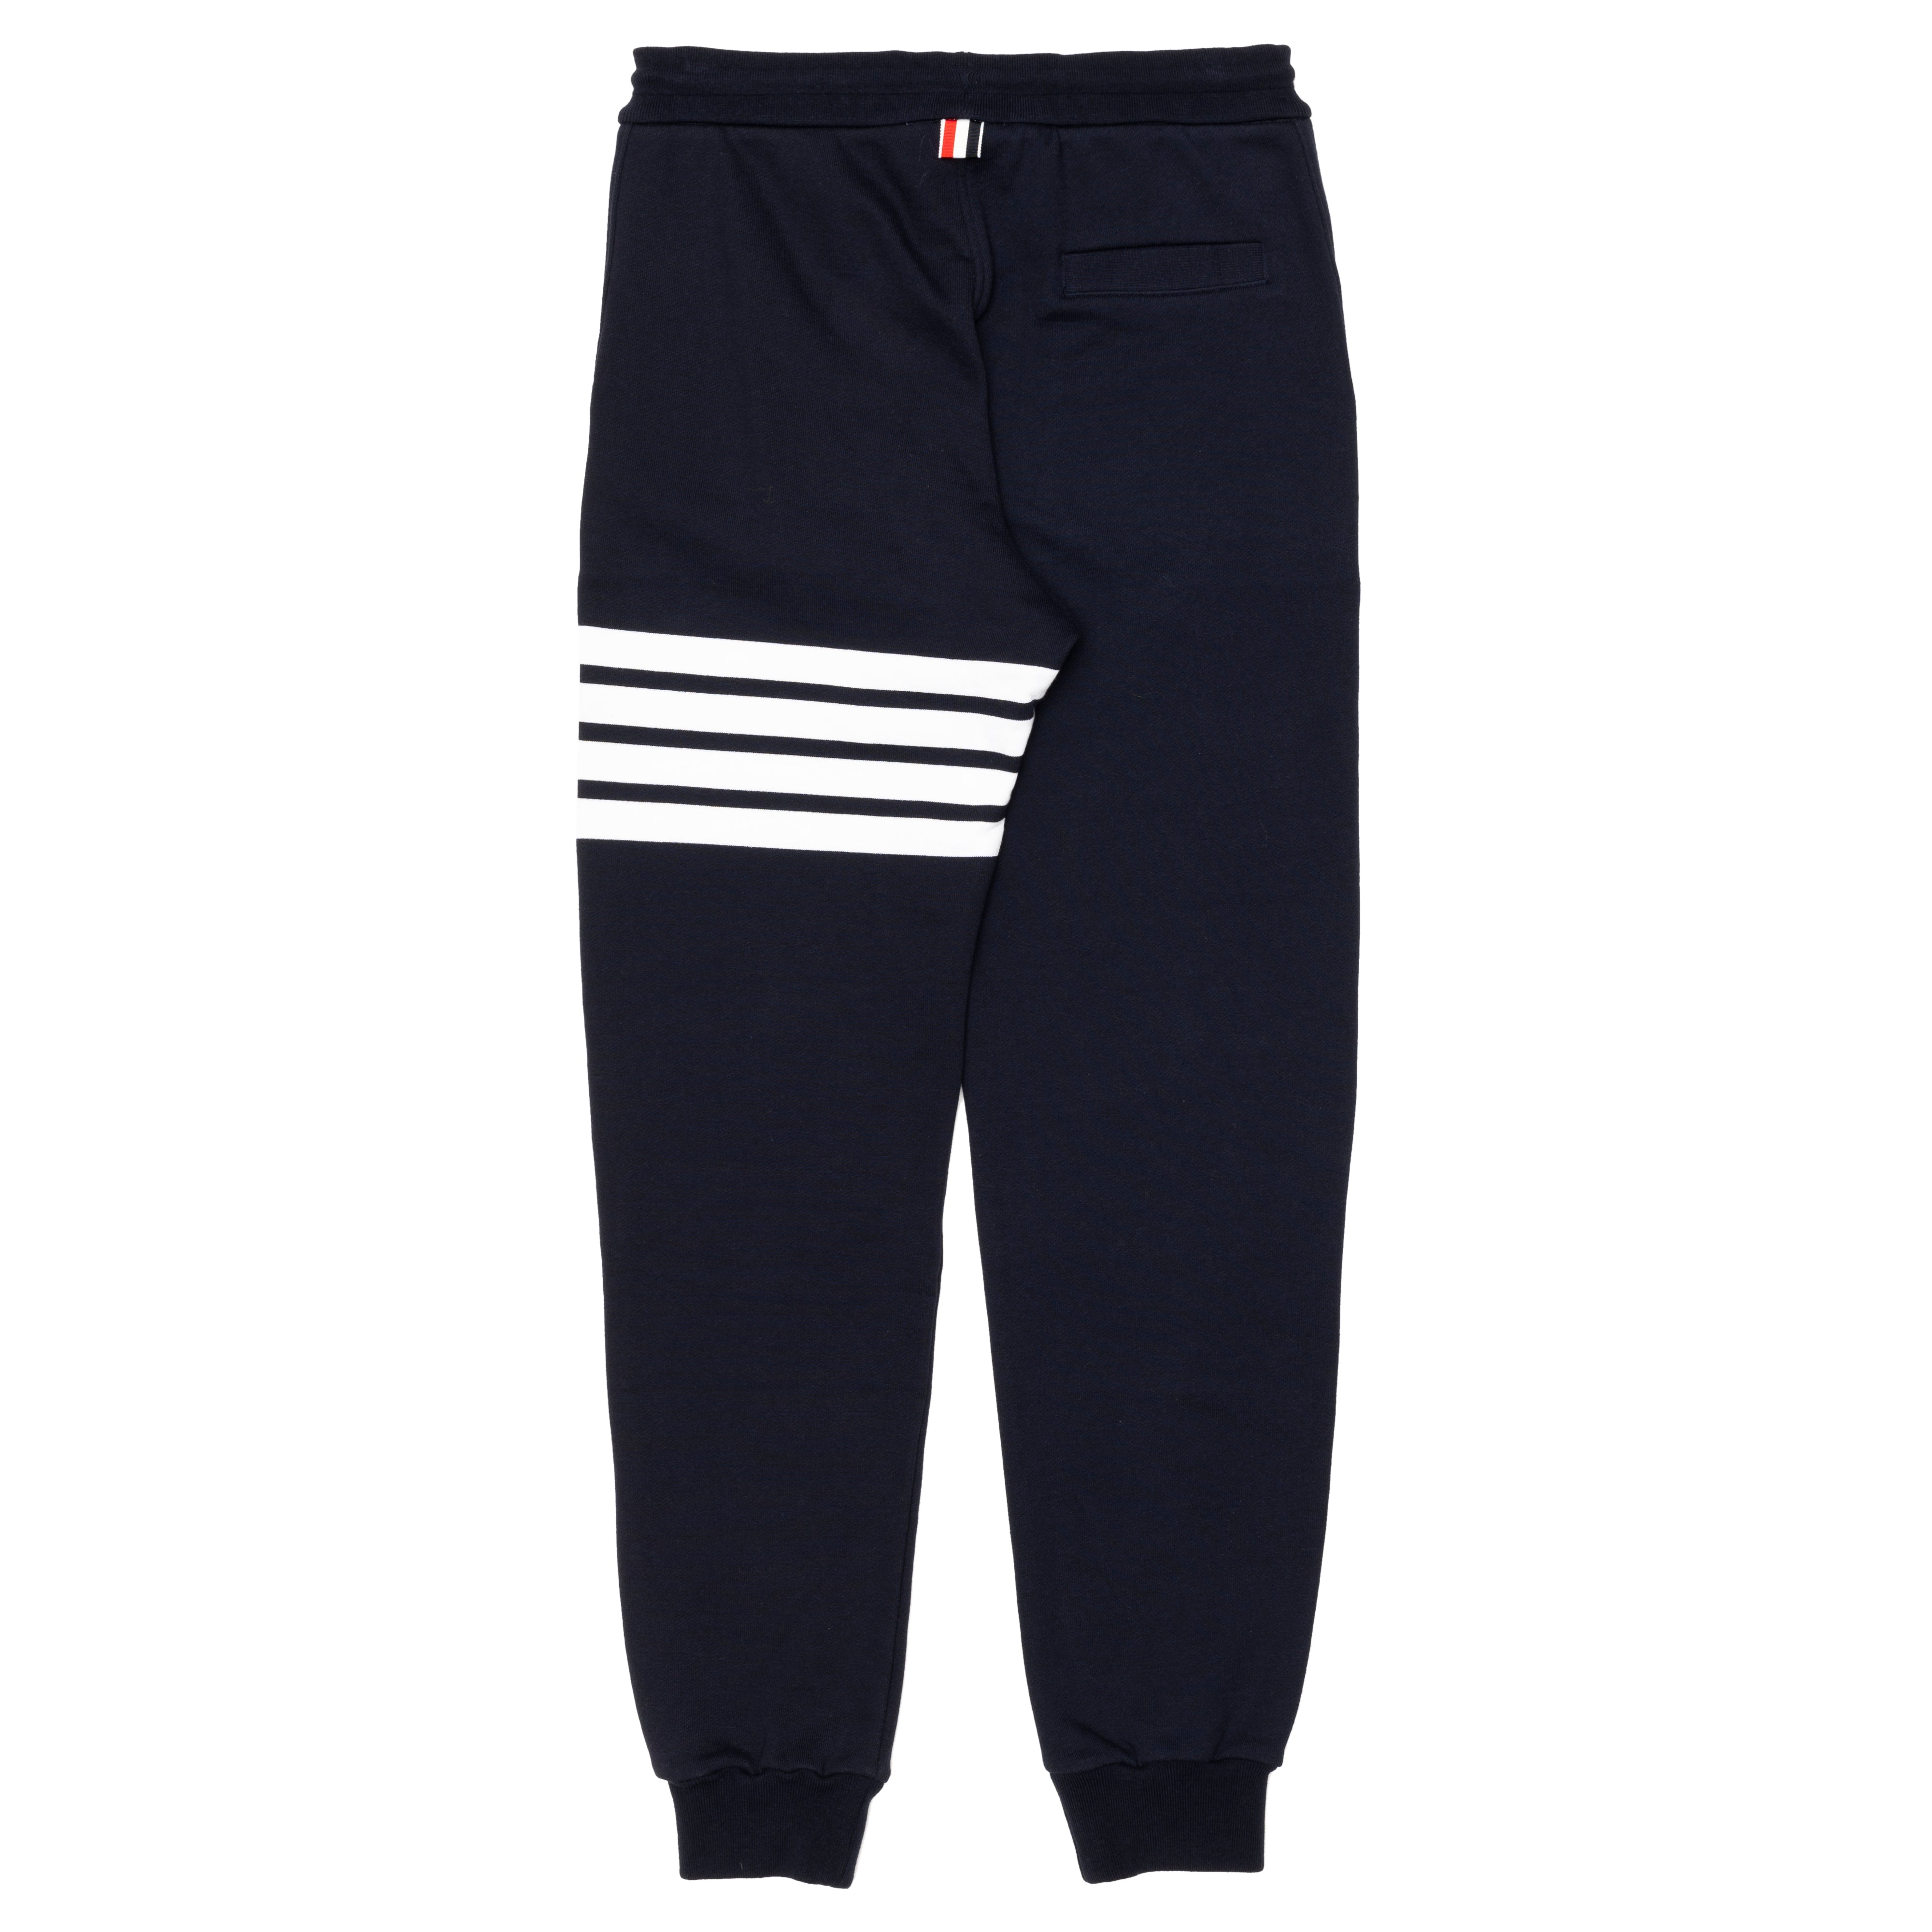 THOM BROWNE - MENS CLASSIC SWEATPANT WITH ENGINEE - NAVY - (MJQ008H-00535)